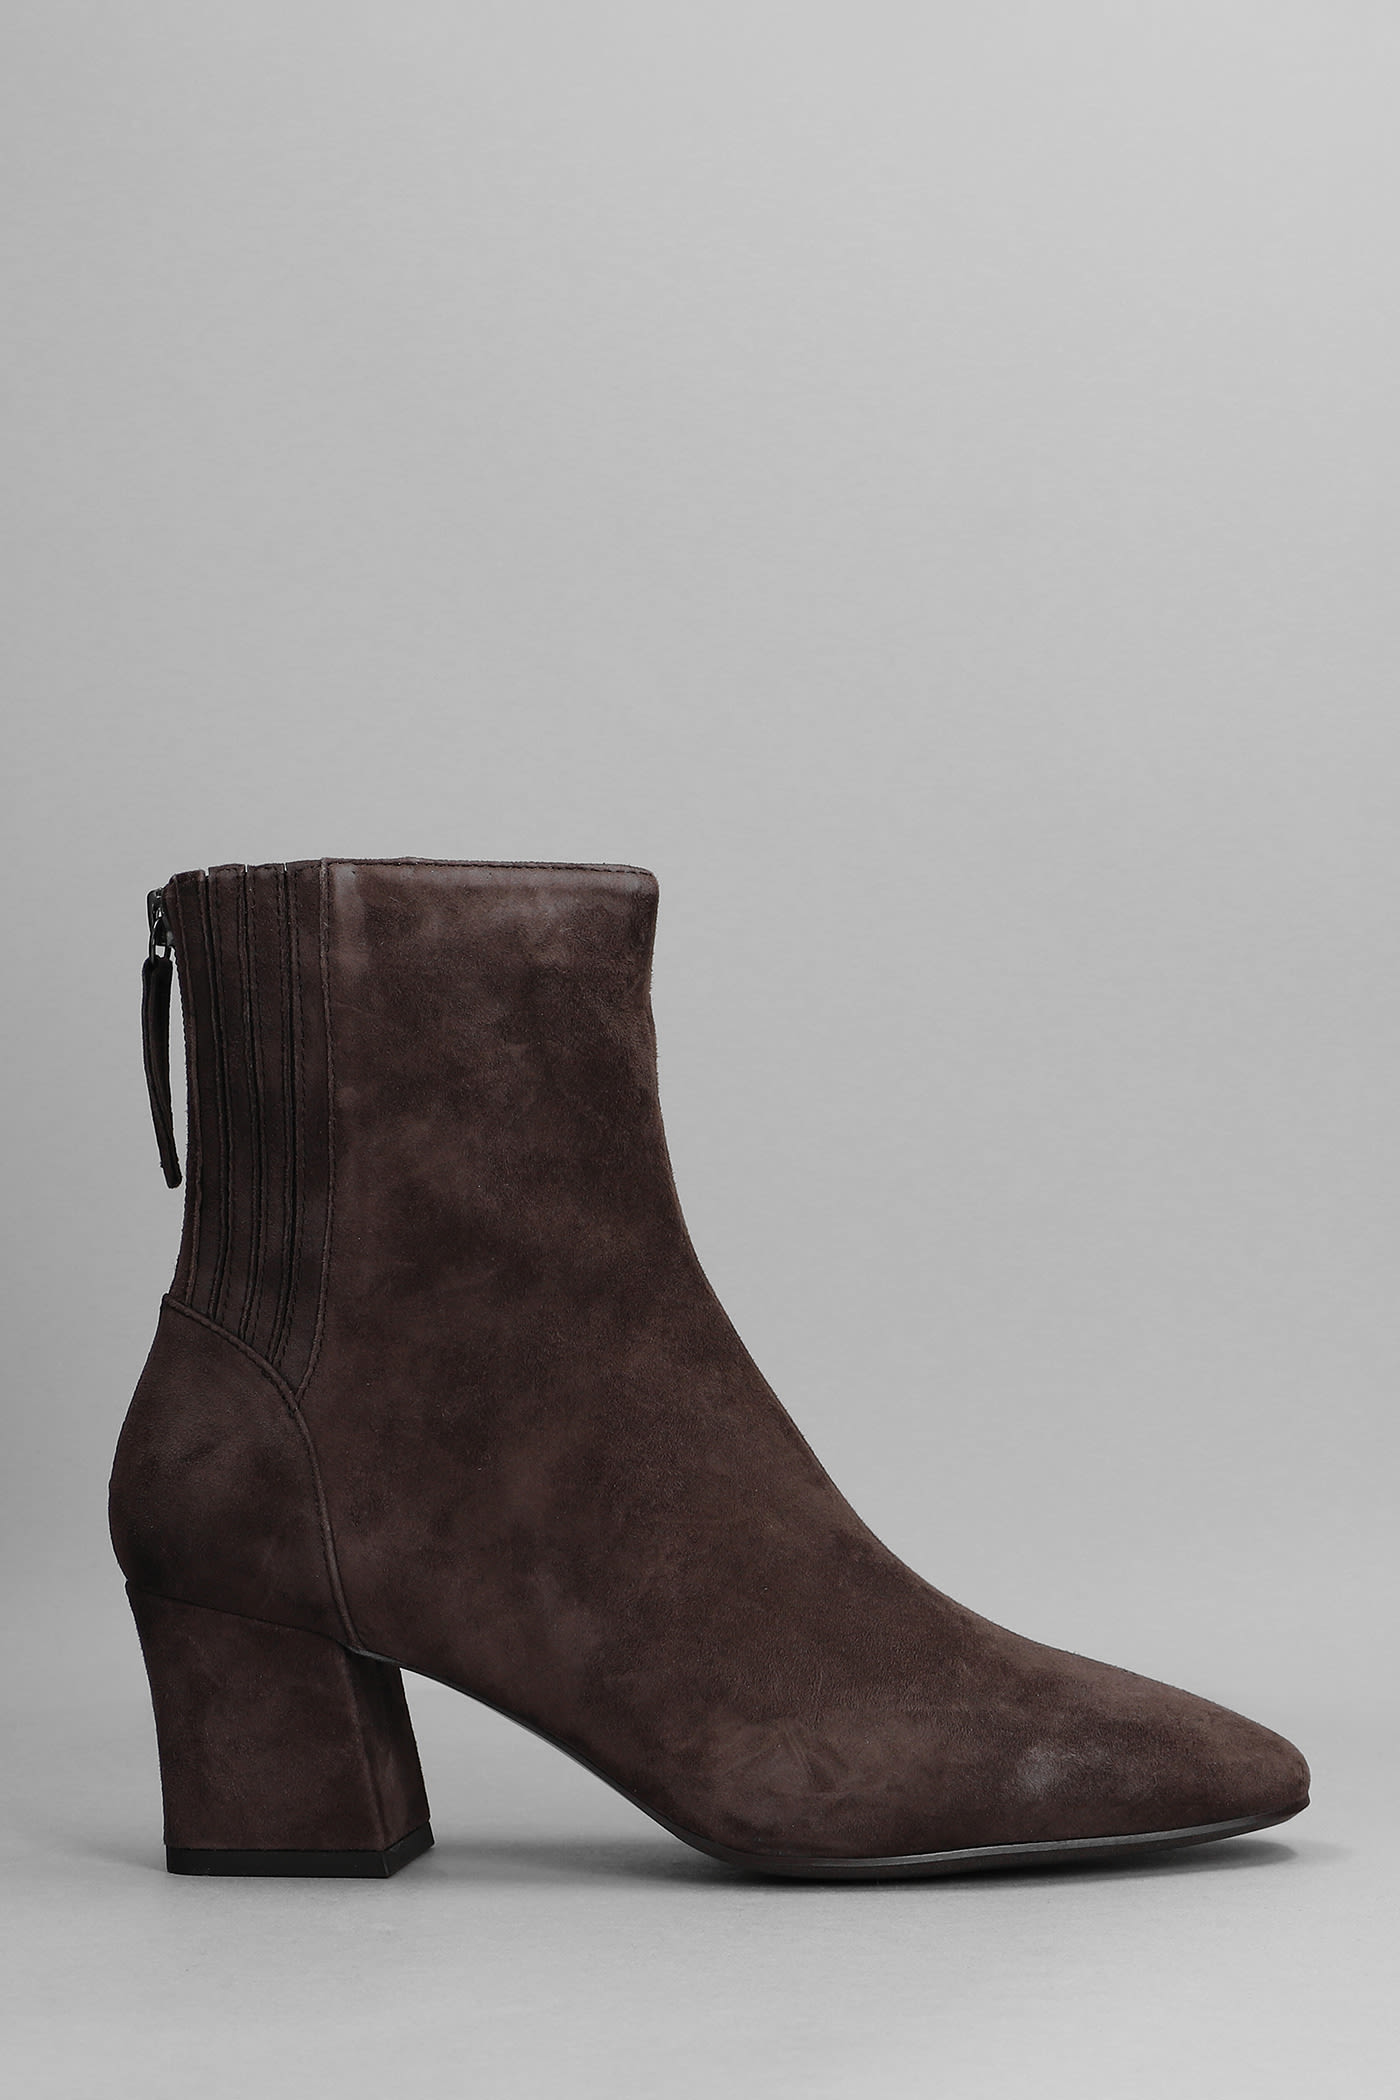 Ash Instant High Heels Ankle Boots In Brown Suede